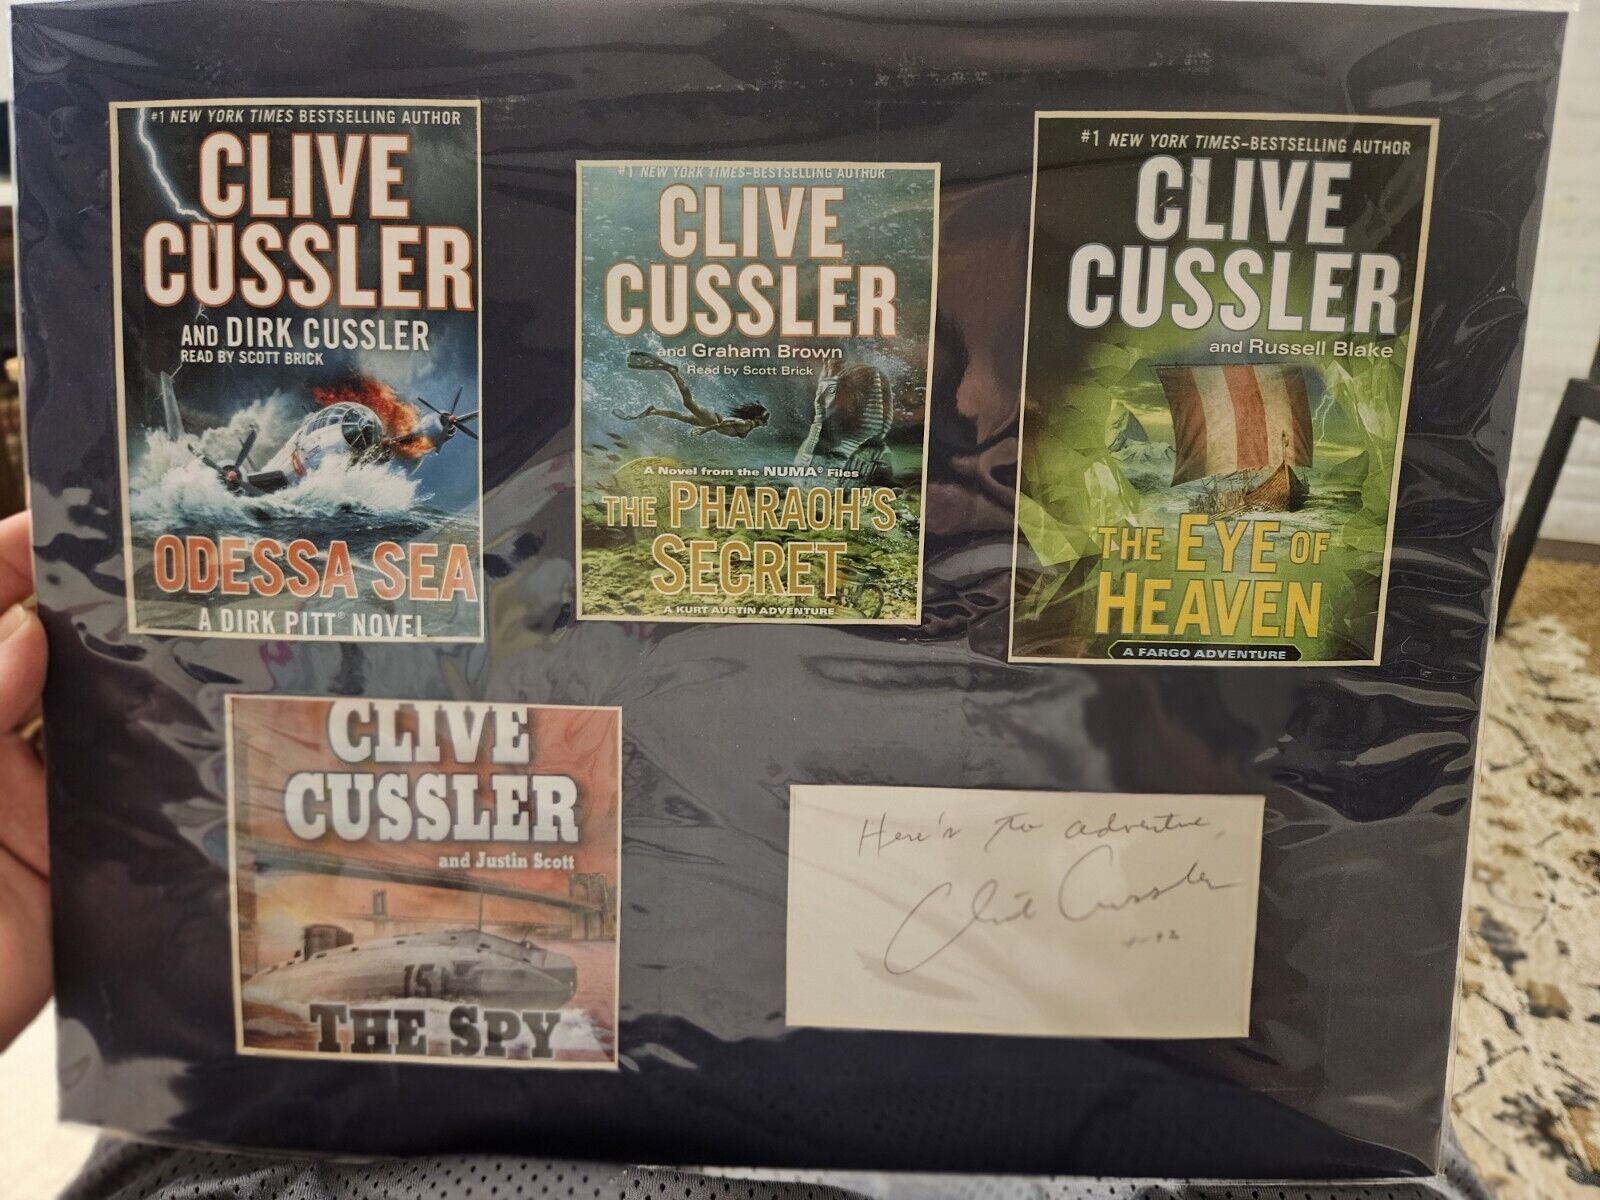 Clive Cussler Signed Display Awesome Piece With COA and Autograph